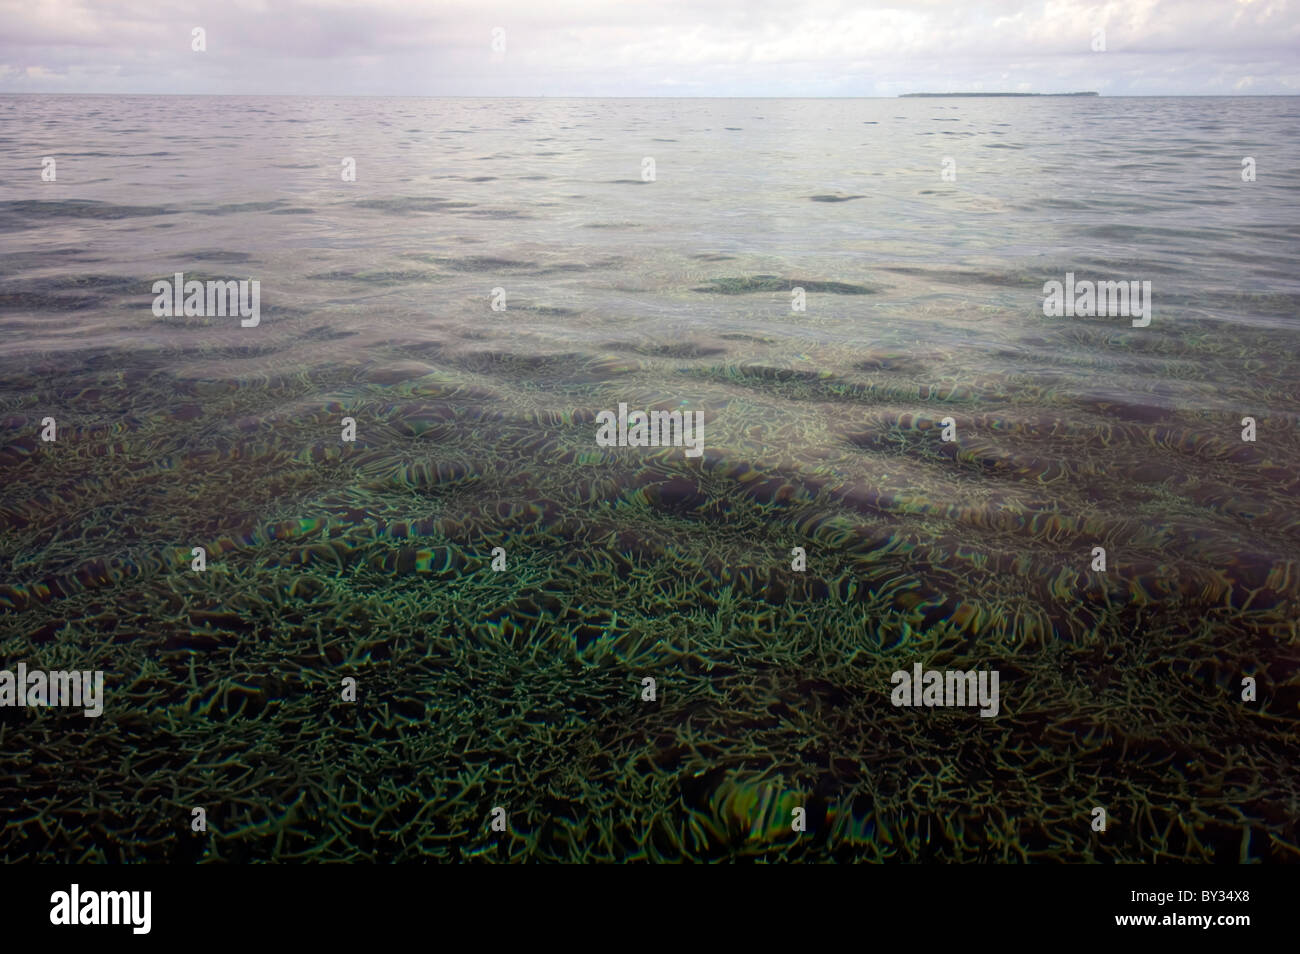 Fragile corals including Acropora growing in sheltered lagoon waters, Cocos Keeling atoll, Indian Ocean Stock Photo